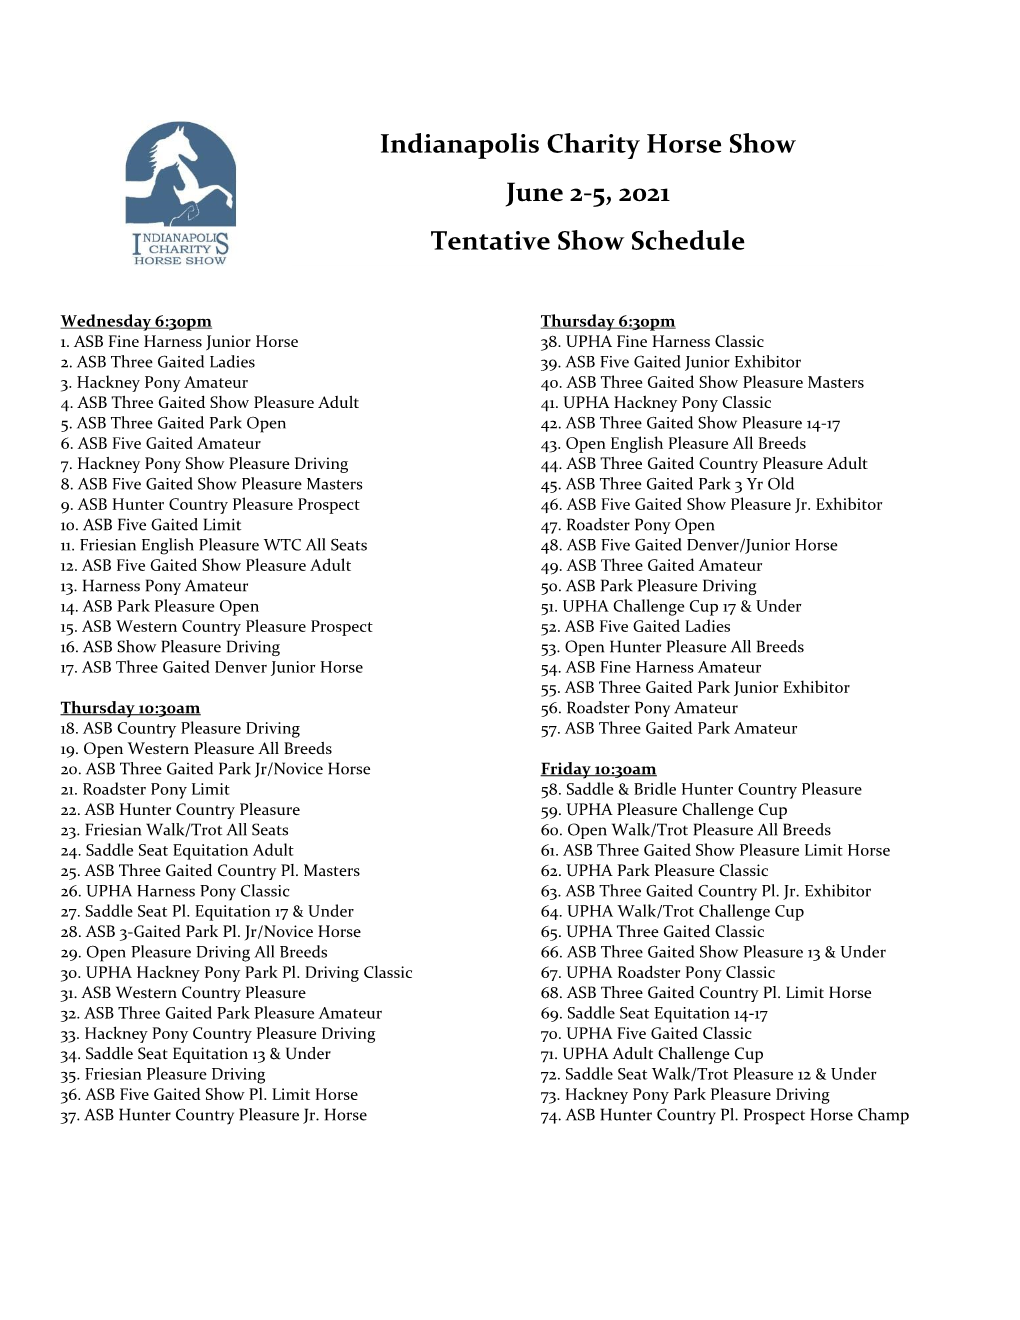 Indianapolis Charity Horse Show June 2-5, 2021 Tentative Show Schedule